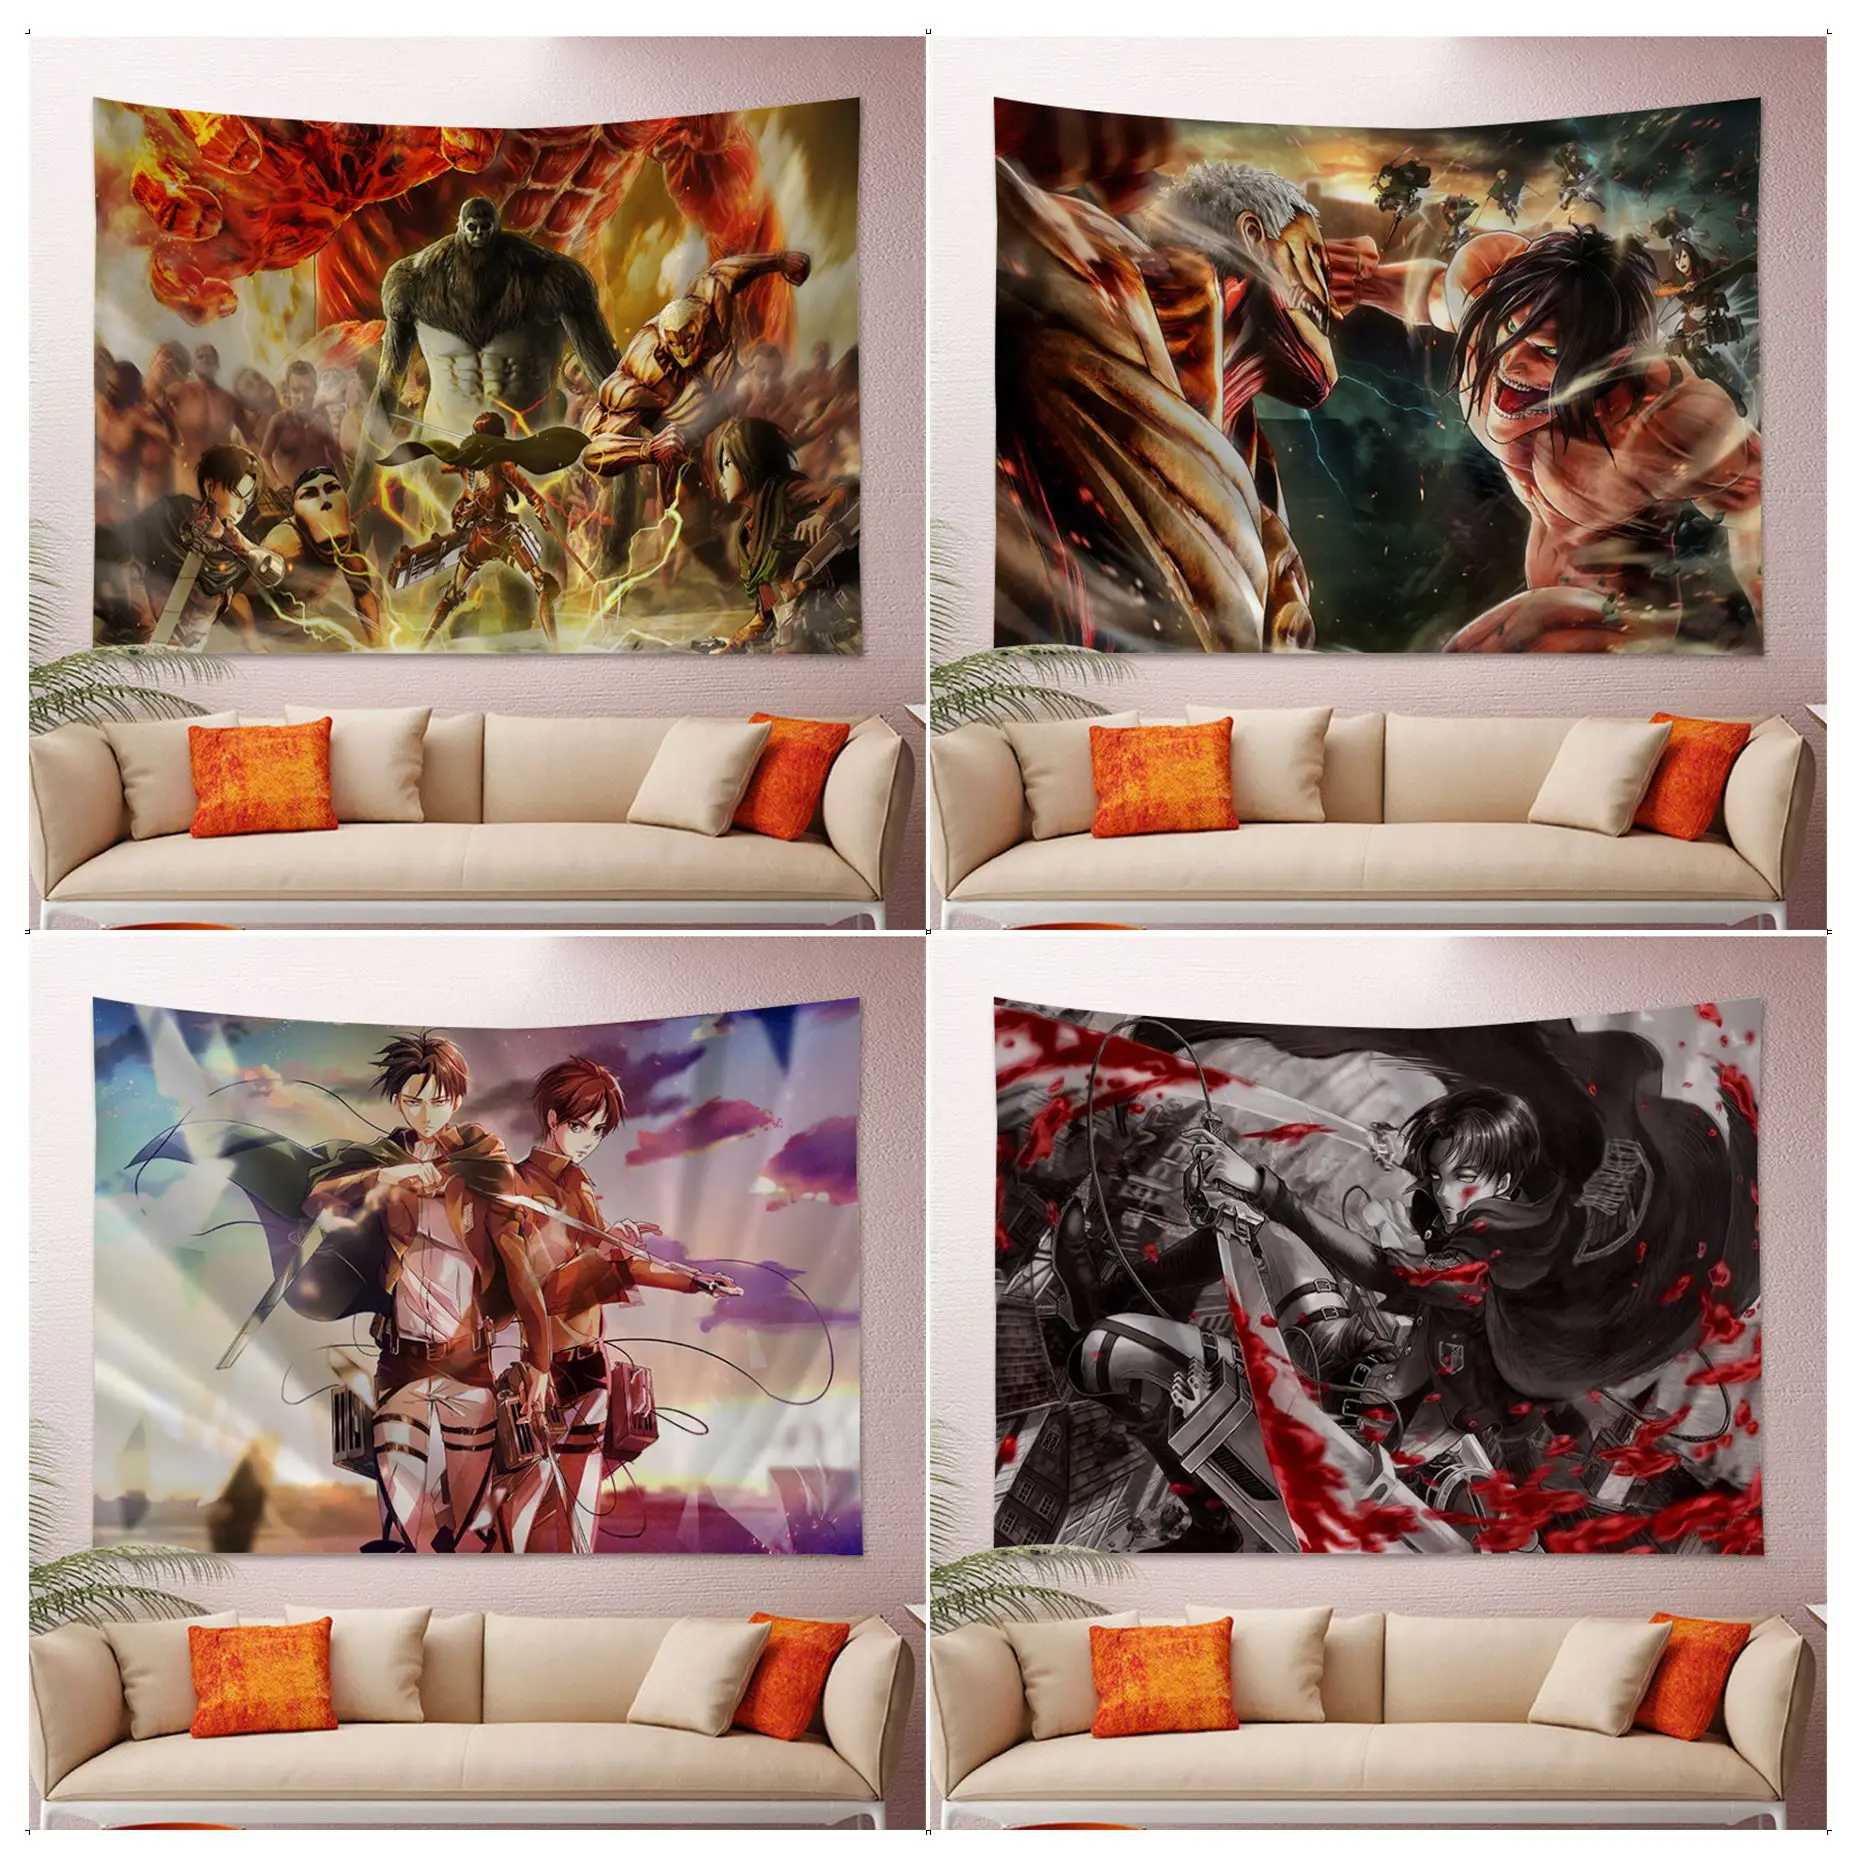 

Cartoon Attack On Titan Wall Tapestry Japanese Wall Tapestry Anime Home Decor